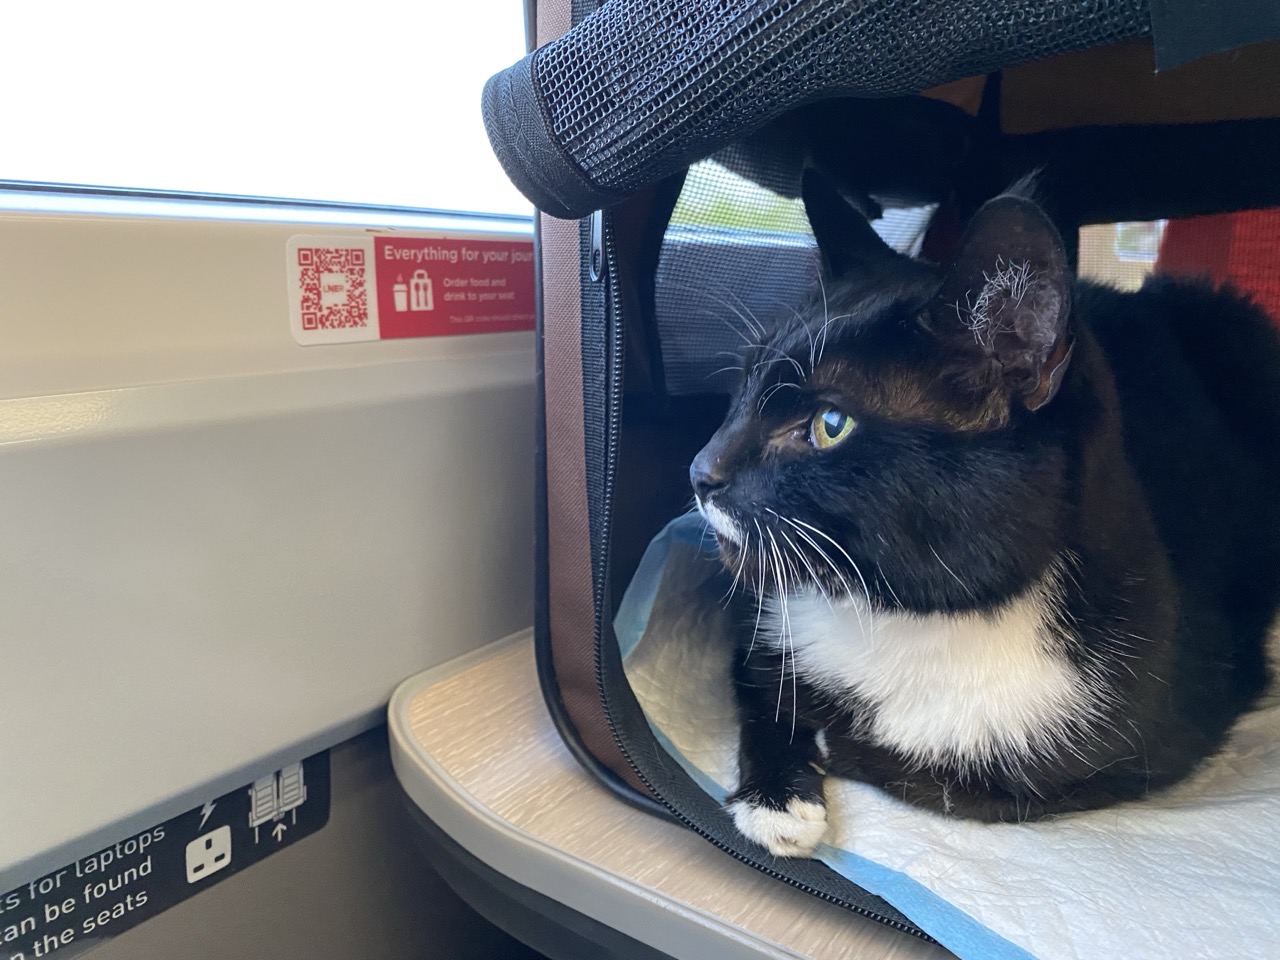 A black and white cat in a carrier looking out the window of the train, pensively.